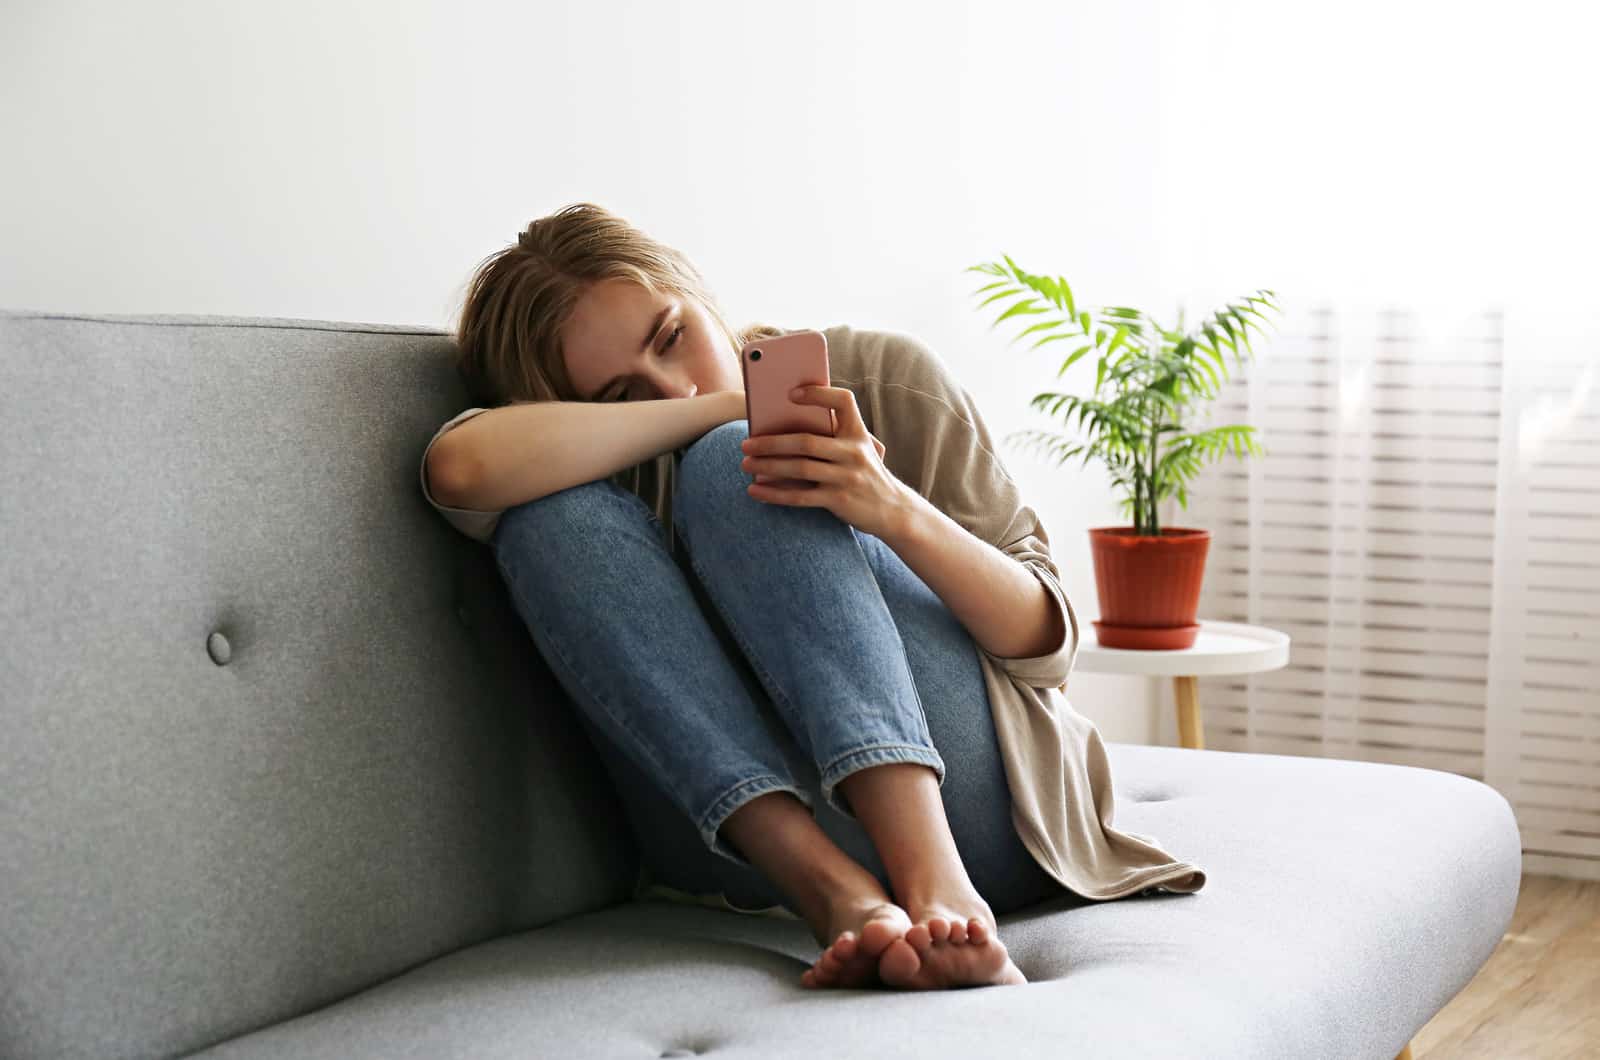 sad woman on couch on phone